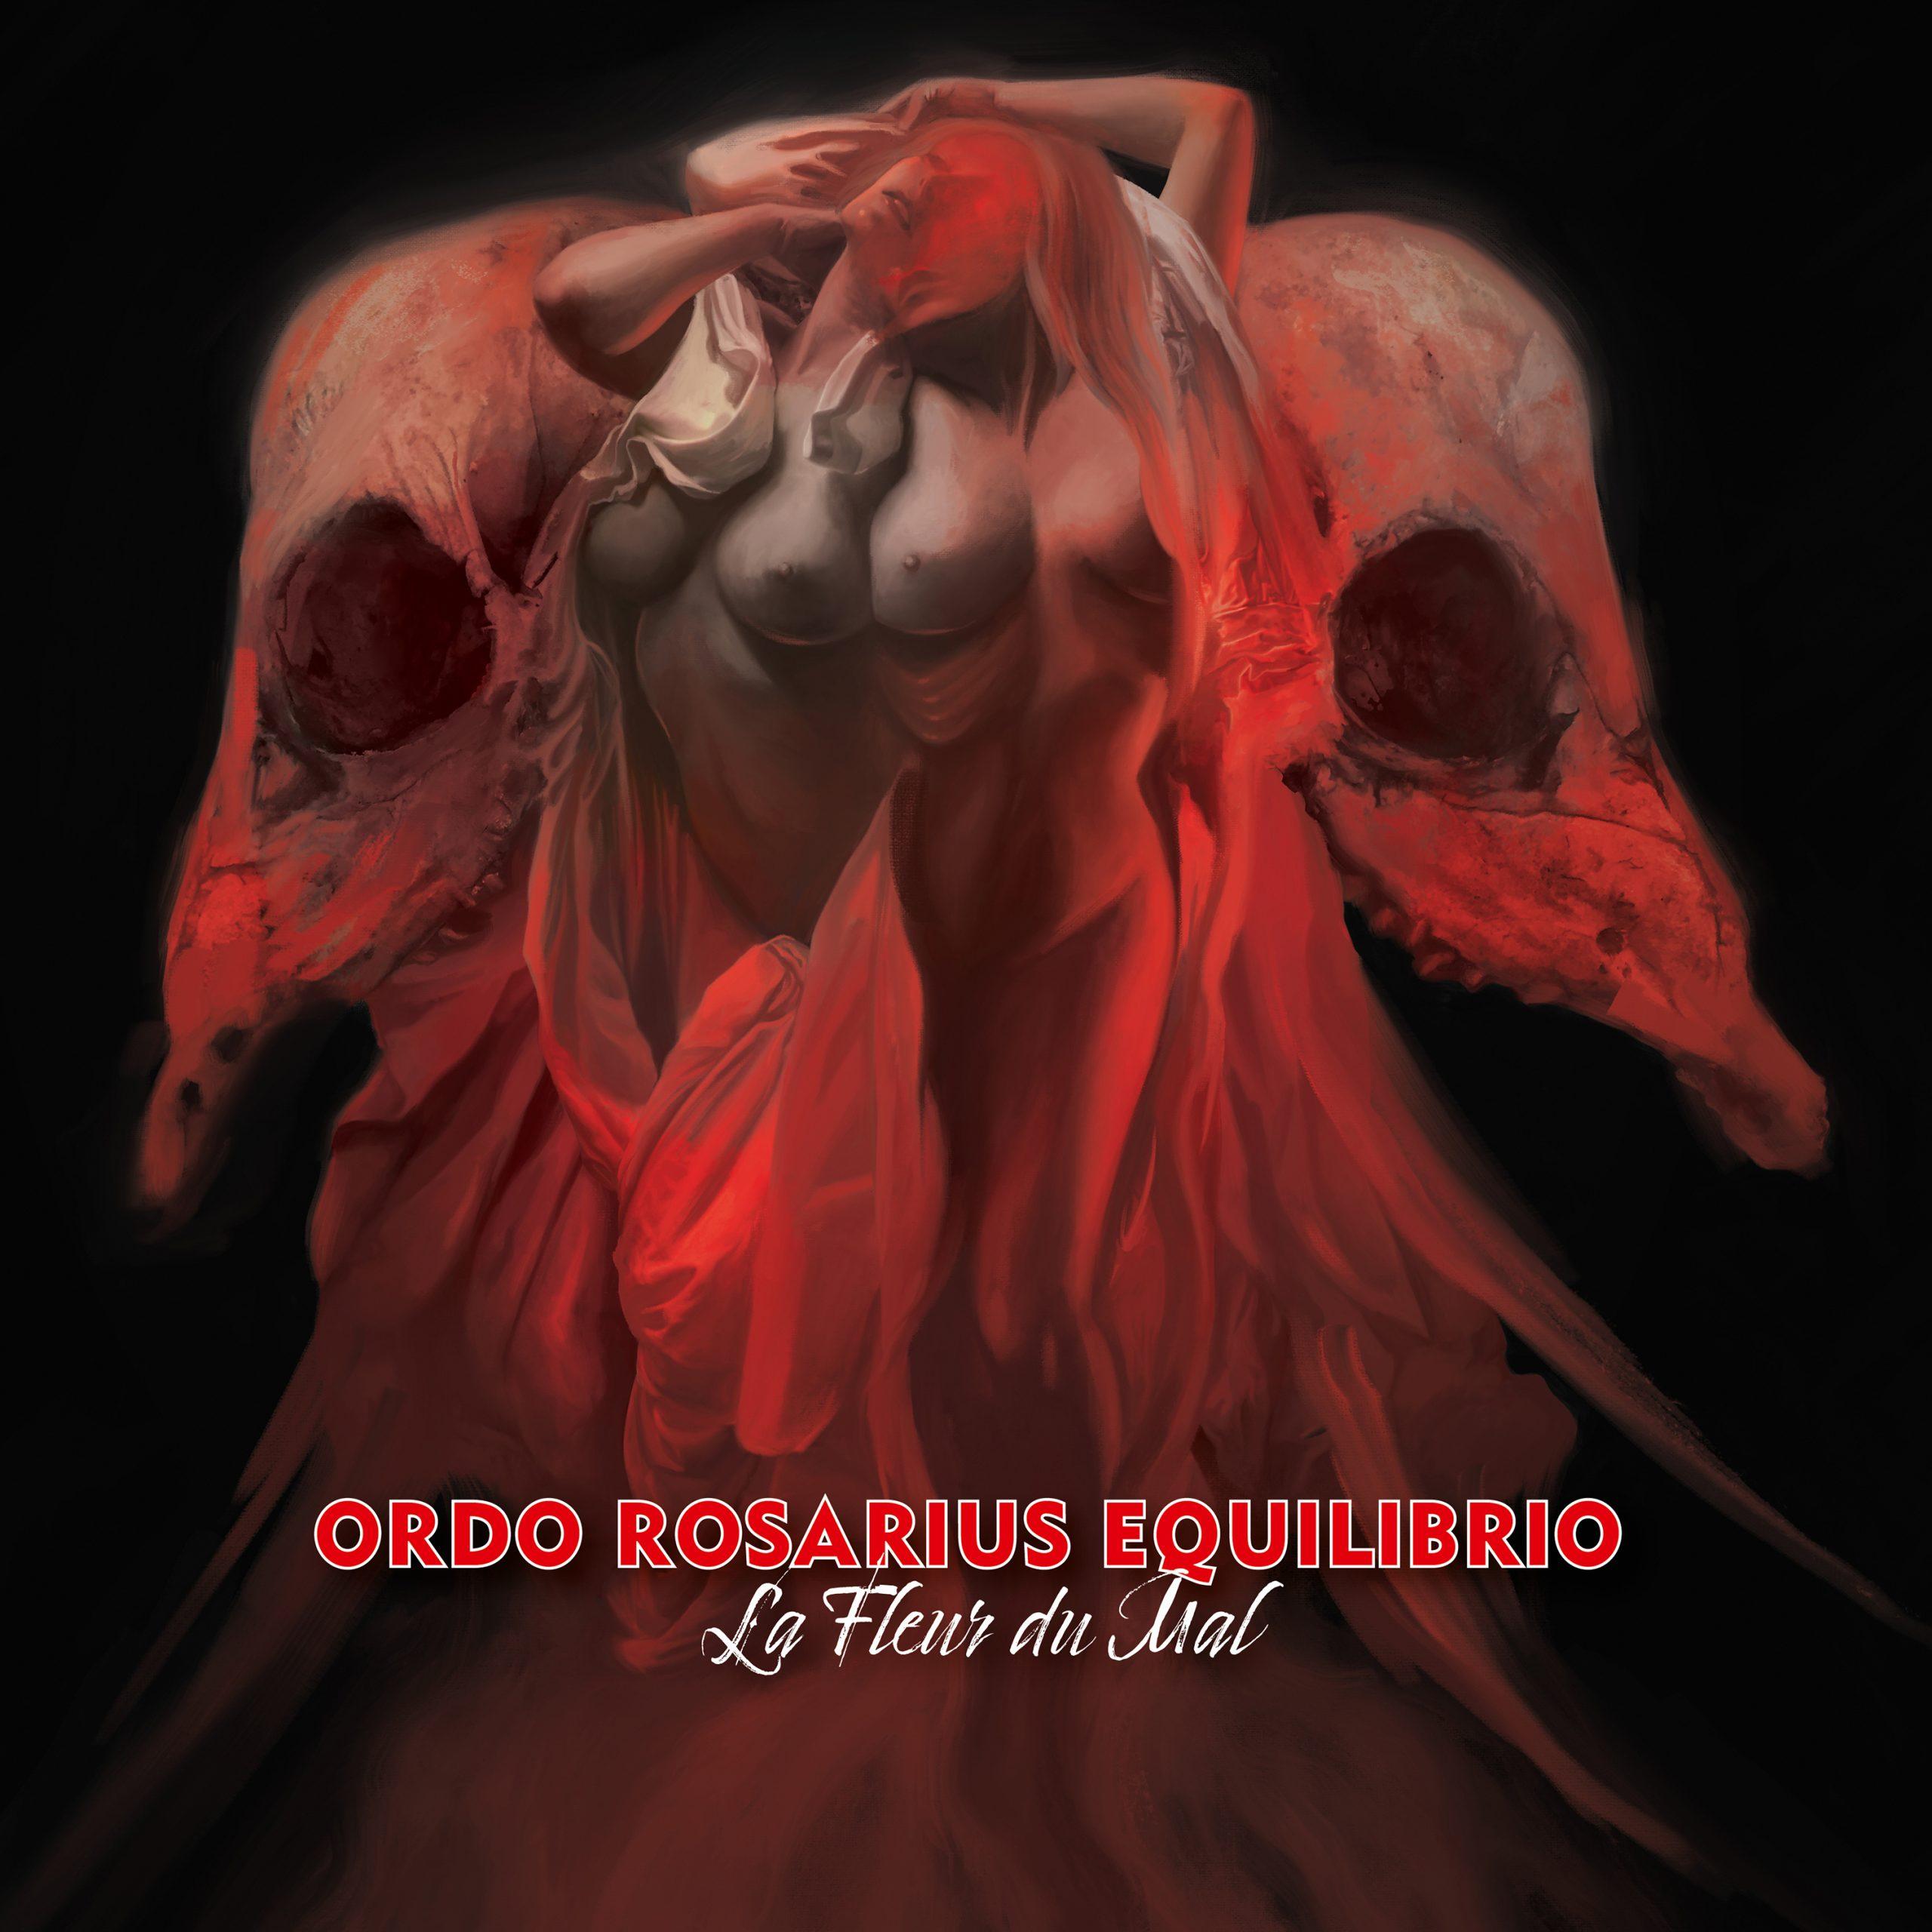 NEW ORDO ROSARIUS EQUILIBRIO album is a sinister return to melody making!